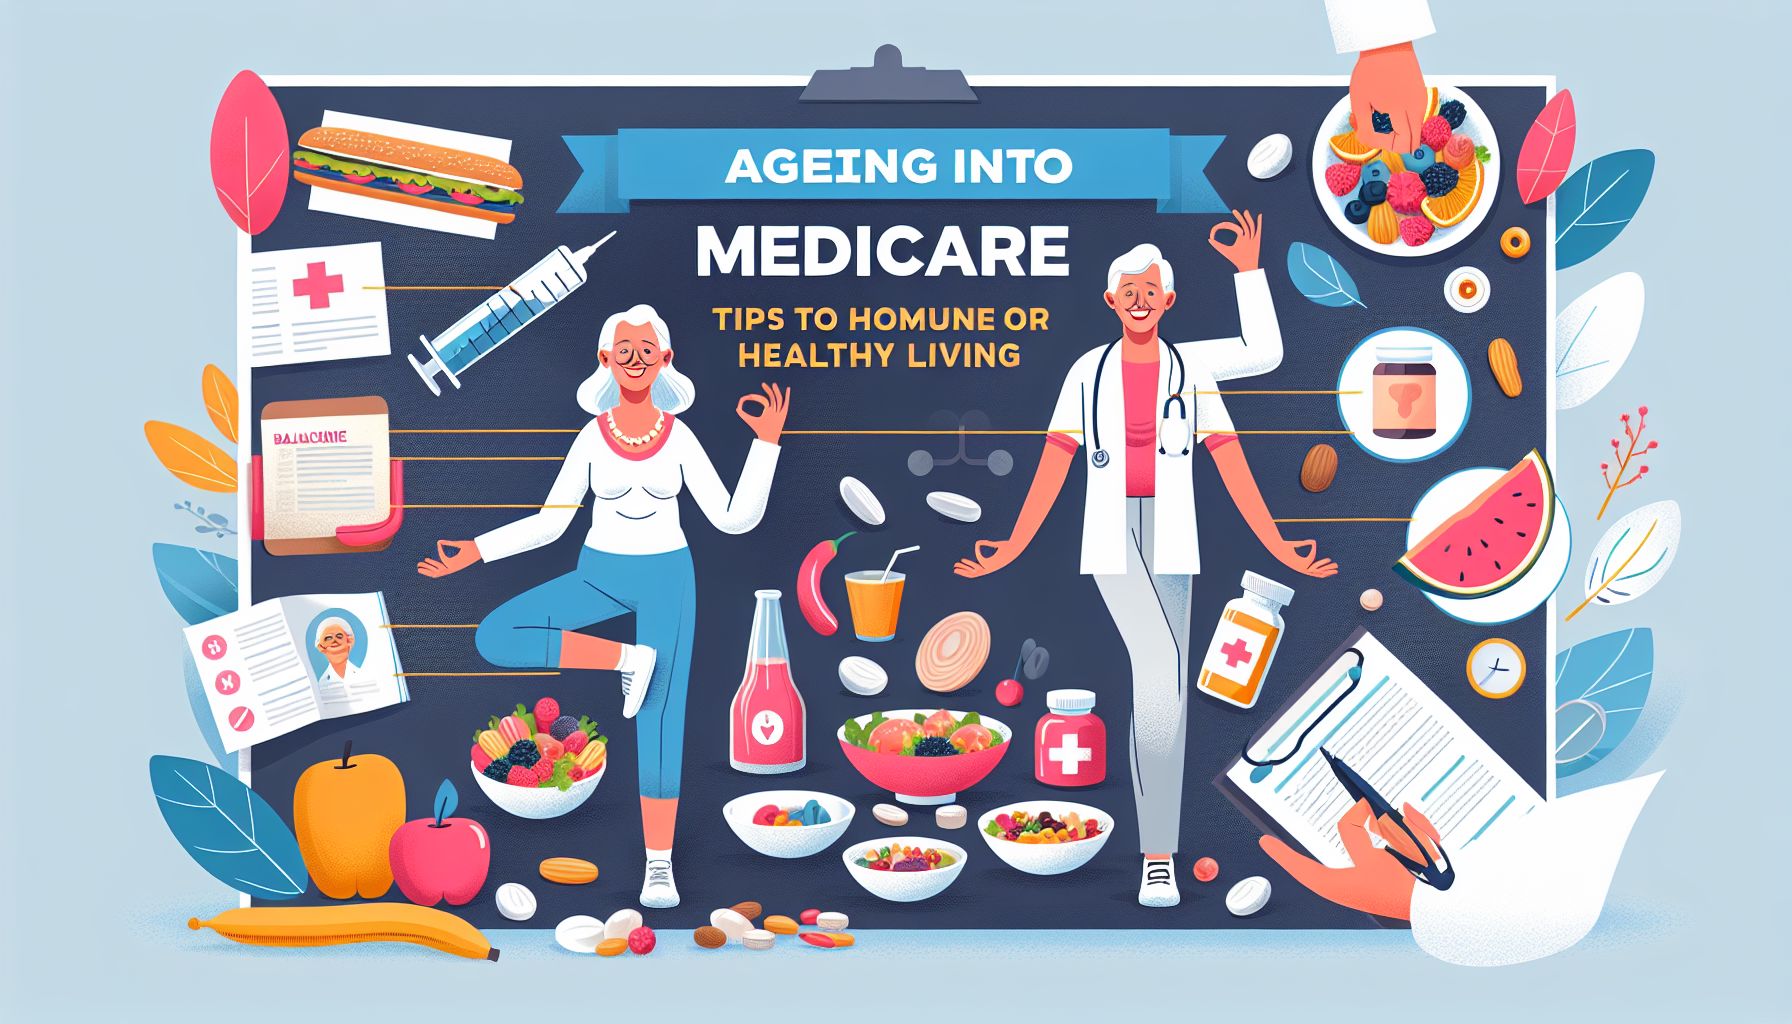 Ageing into Medicare: Tips for Healthy Living